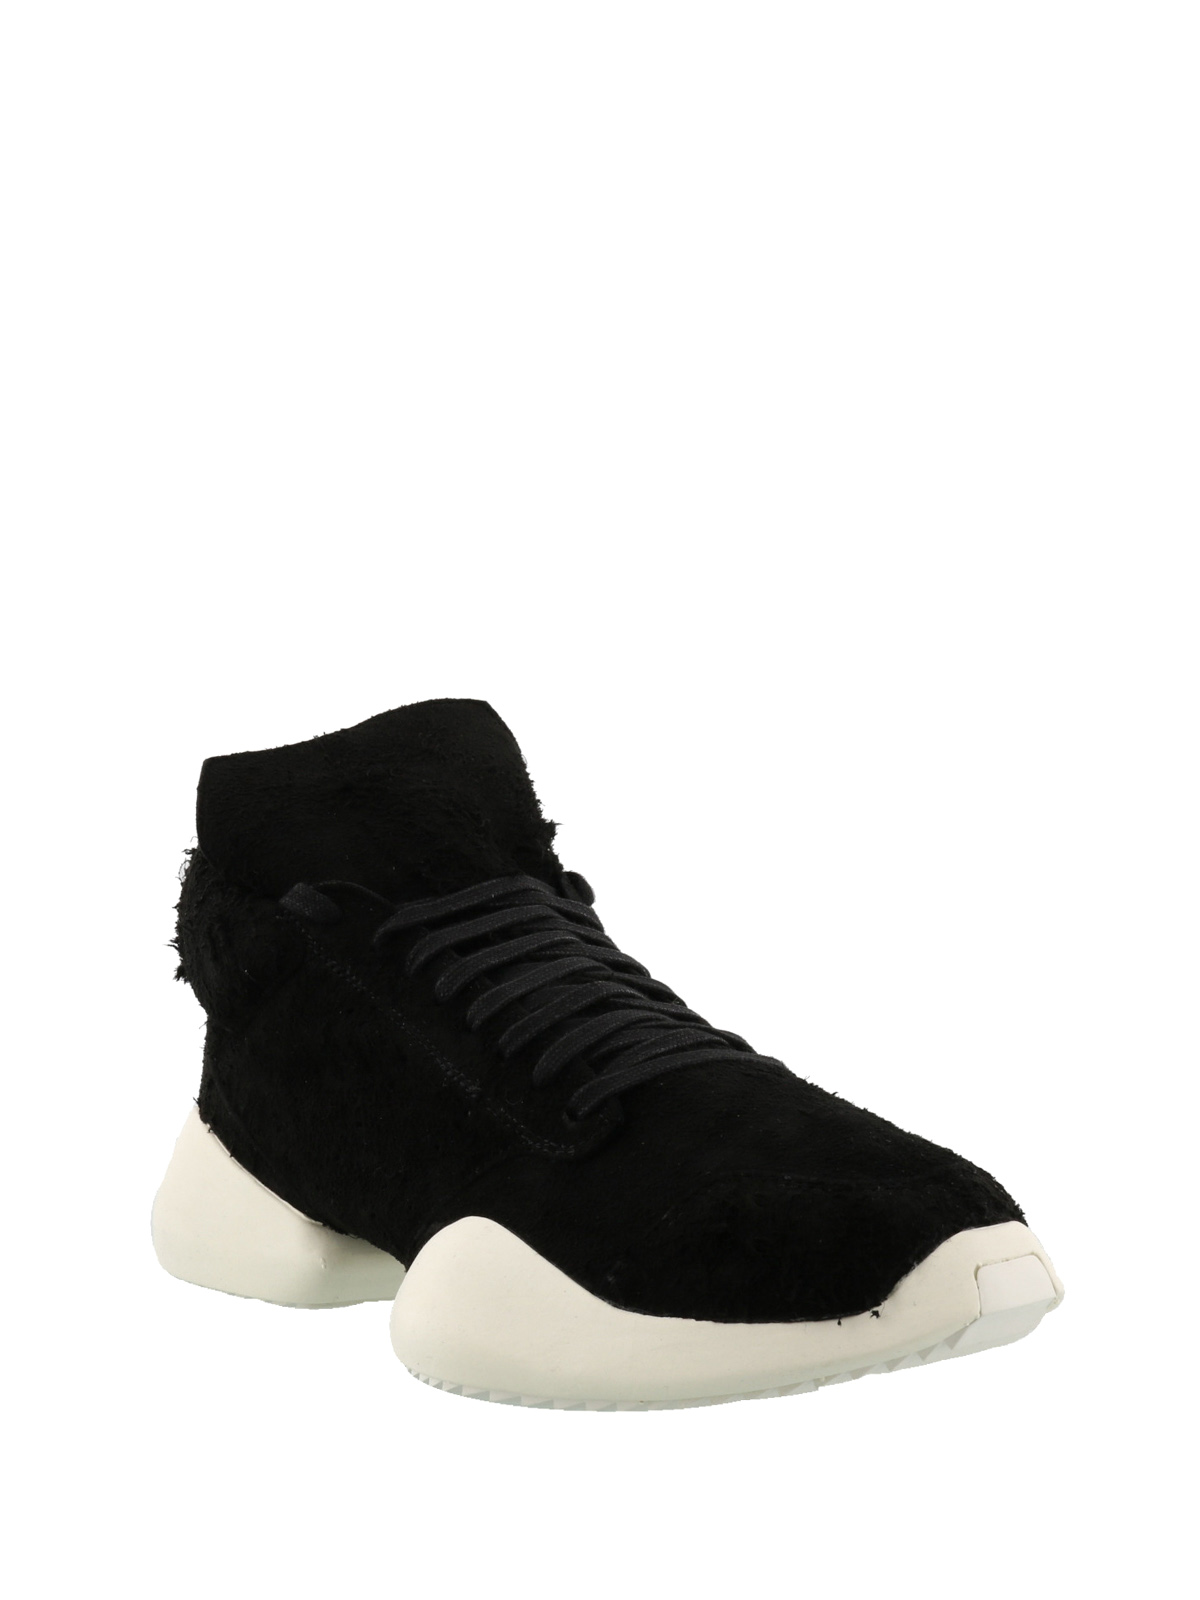 Trainers Adidas by Rick Owens - Vicious Runner black suede